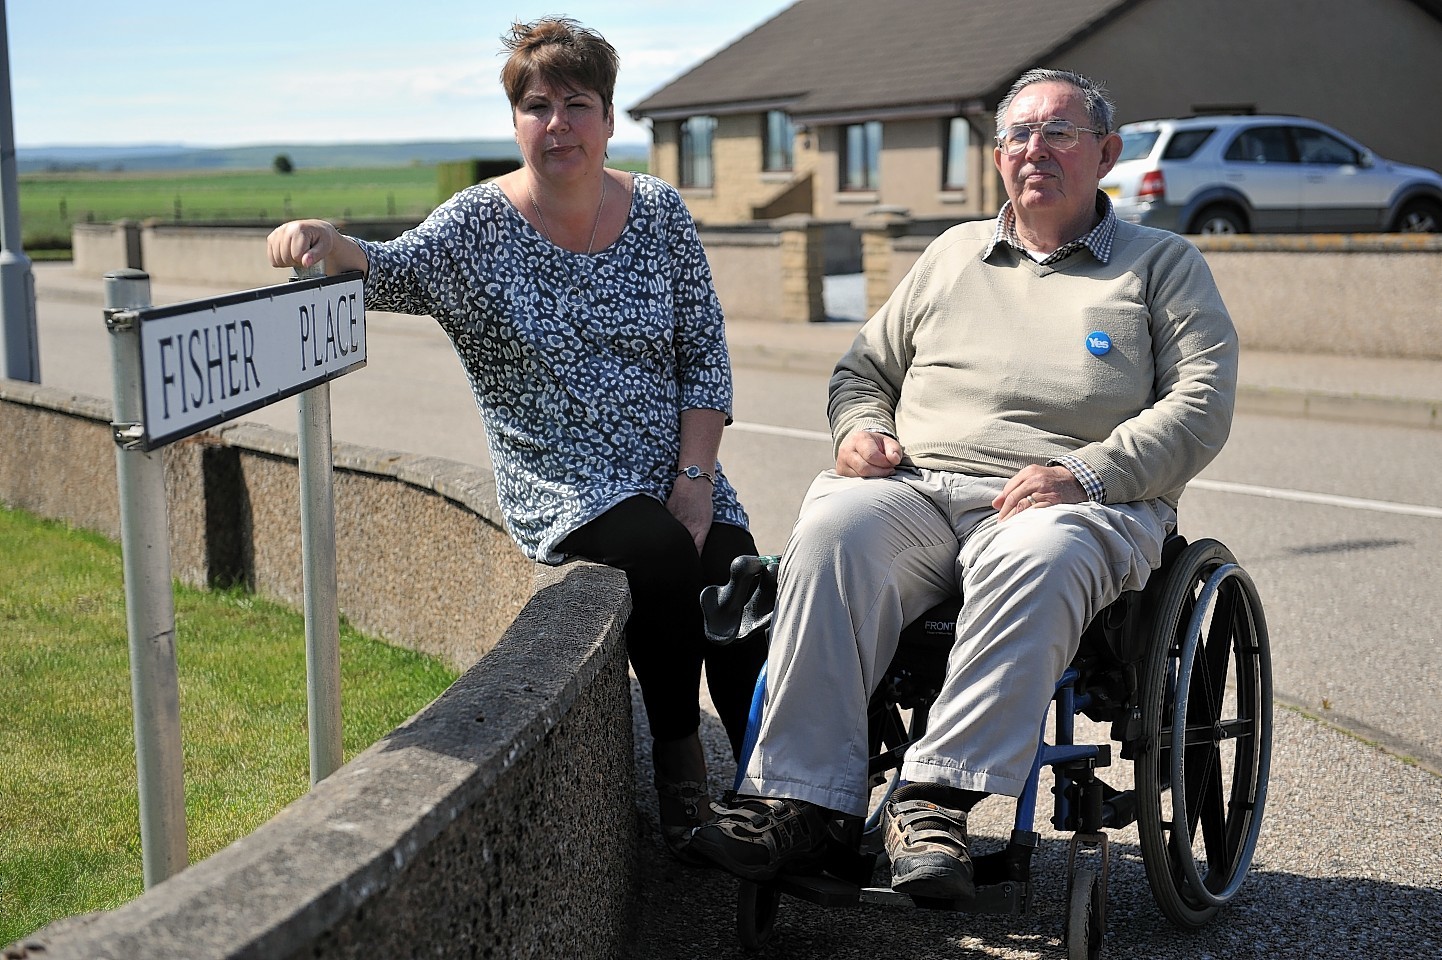 Gillian Priestley, left, and Robbie Murdoch, right, in Fisher Place, Lossiemouth which is possibly set to change from a cul-de-sac to a major thouroghfare to a new housing development